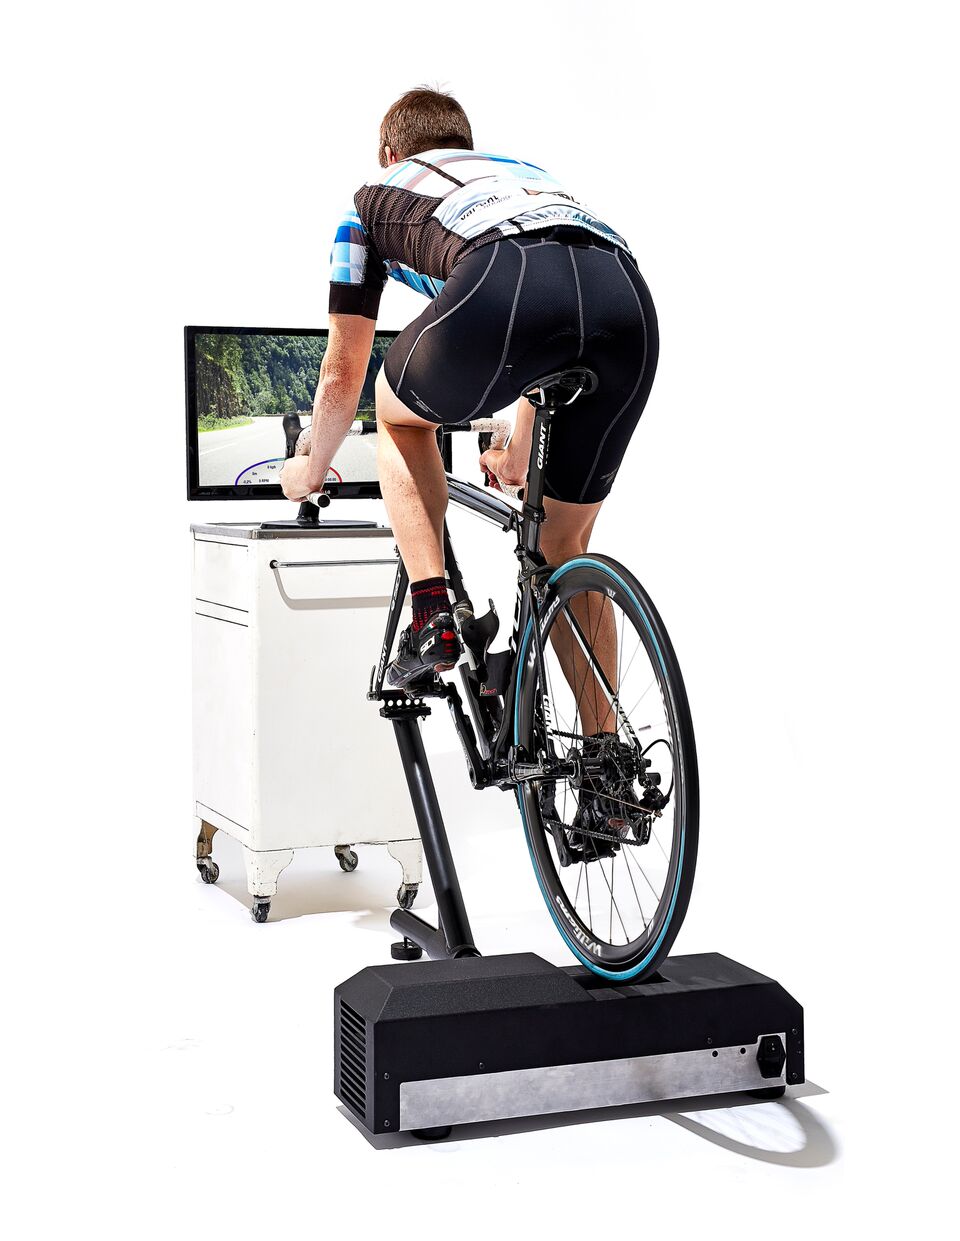 vr cycling trainer